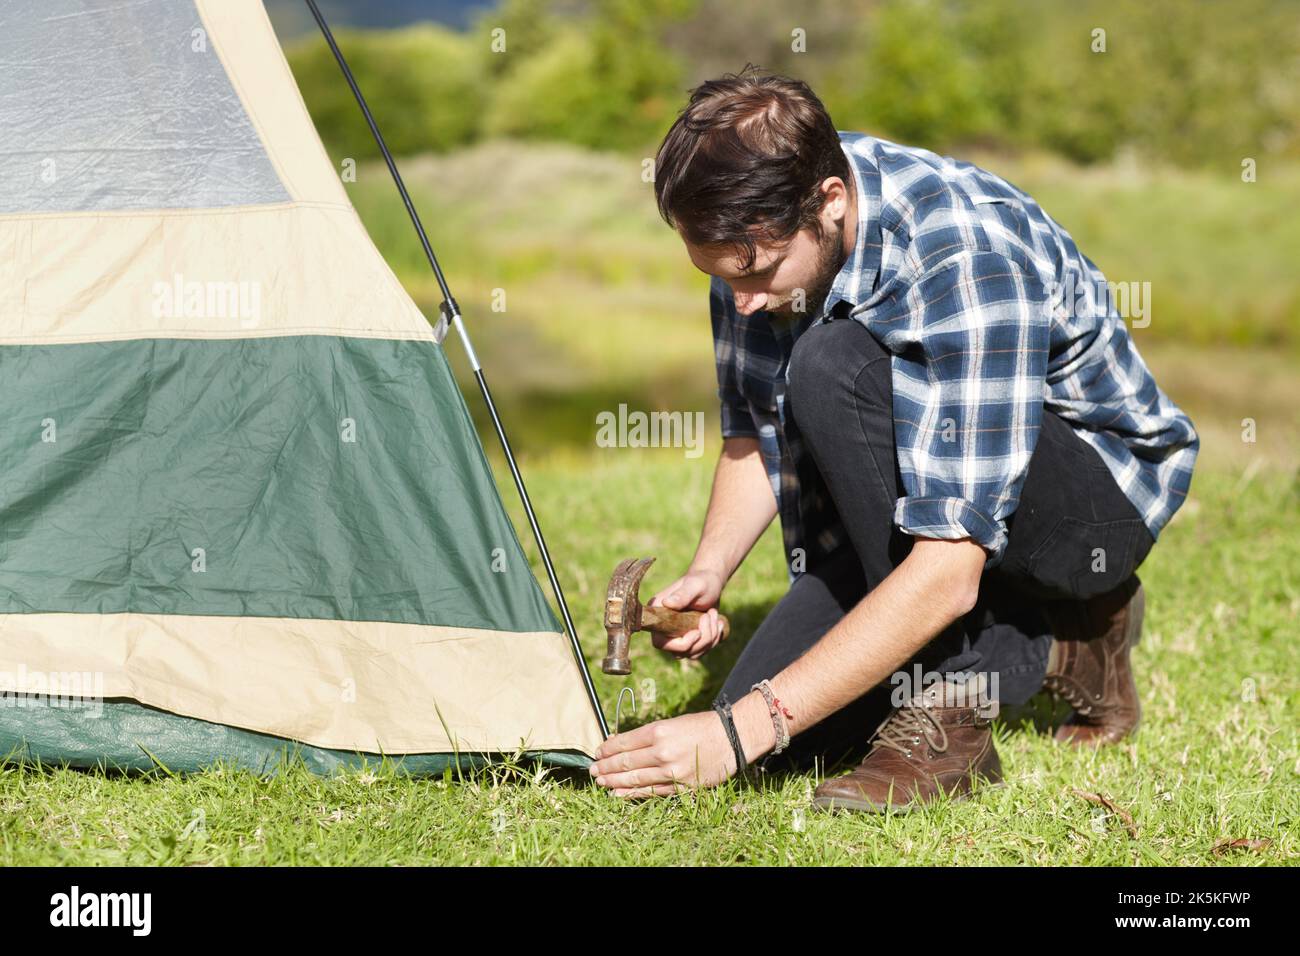 Better make sure its securely fastened. Handsome young man hammering a tent peg into the ground. Stock Photo